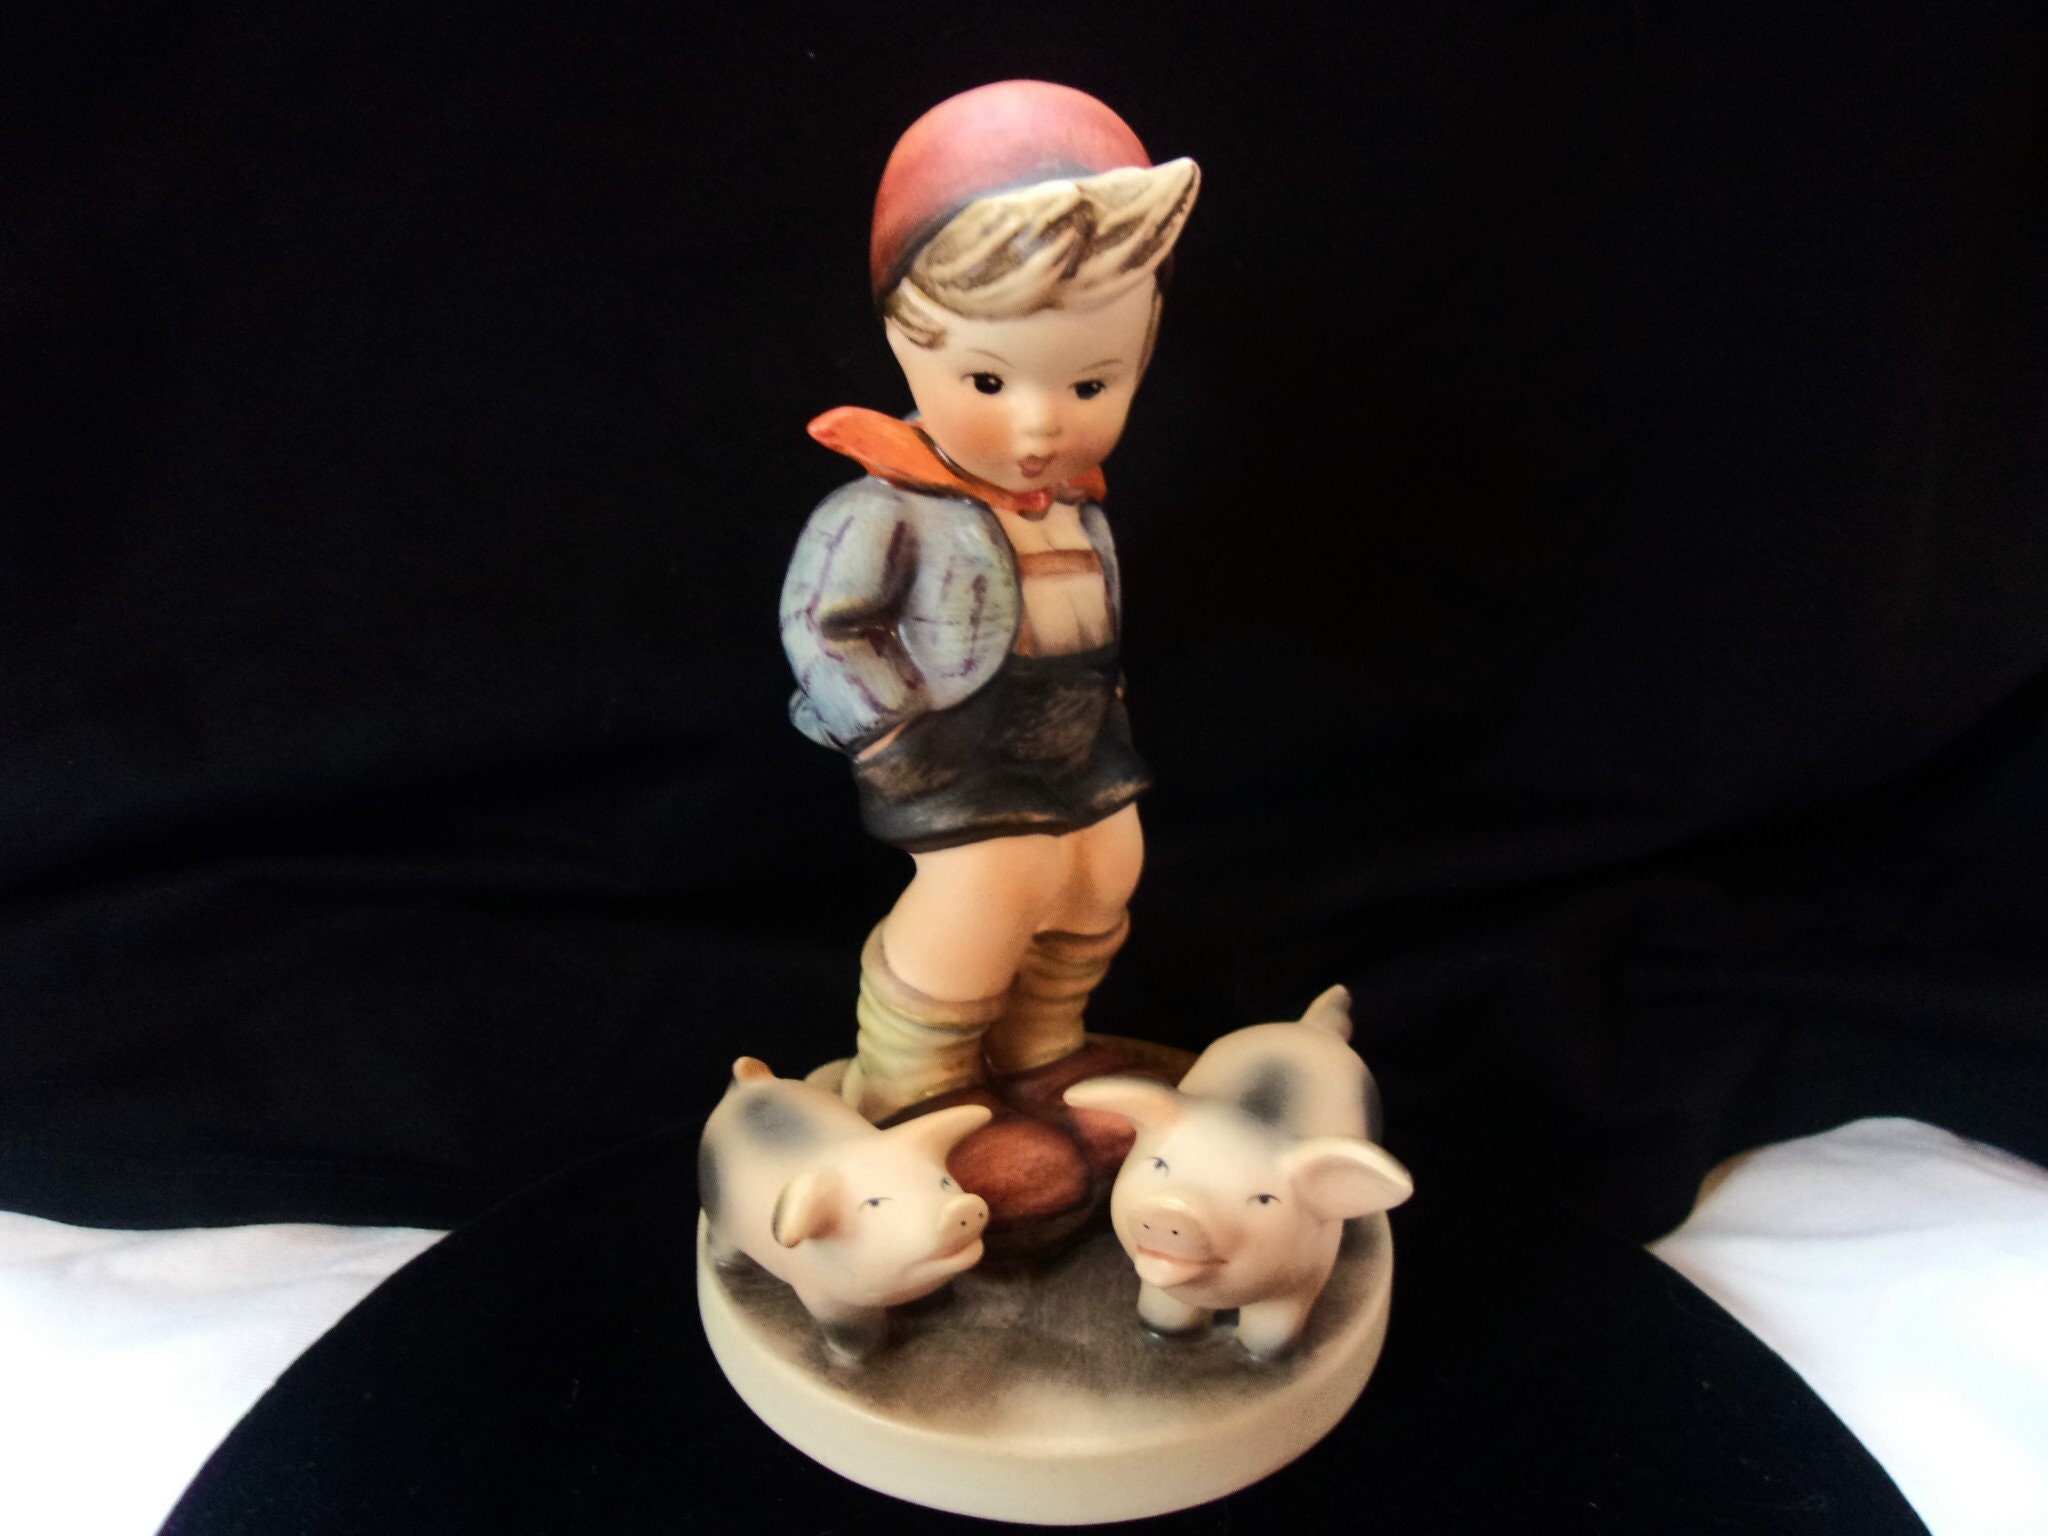 6 Most Valuable Hummel Figurines You'll Want to Know About